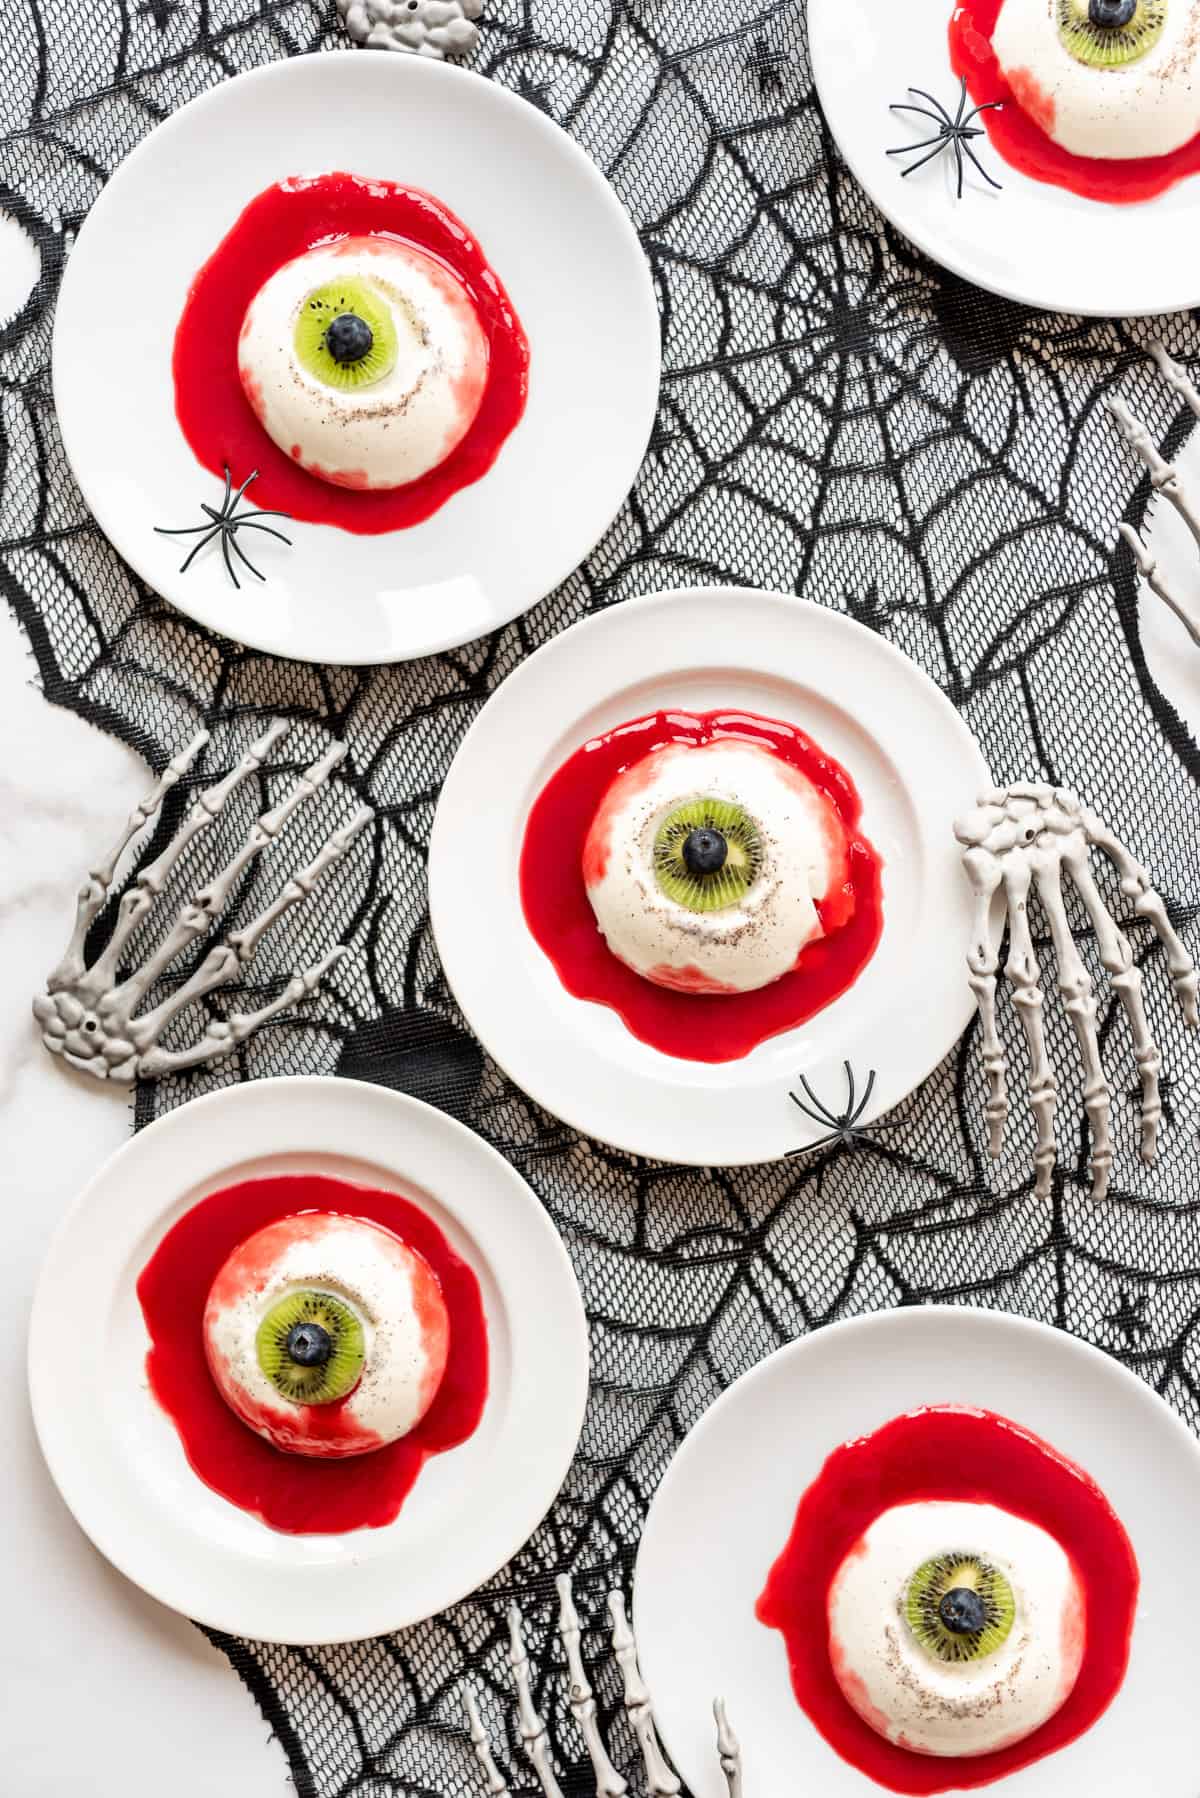 creepy Halloween panna cotta eyeballs made with jello and lychee eyeballs on white plates on top of a spider web place mat